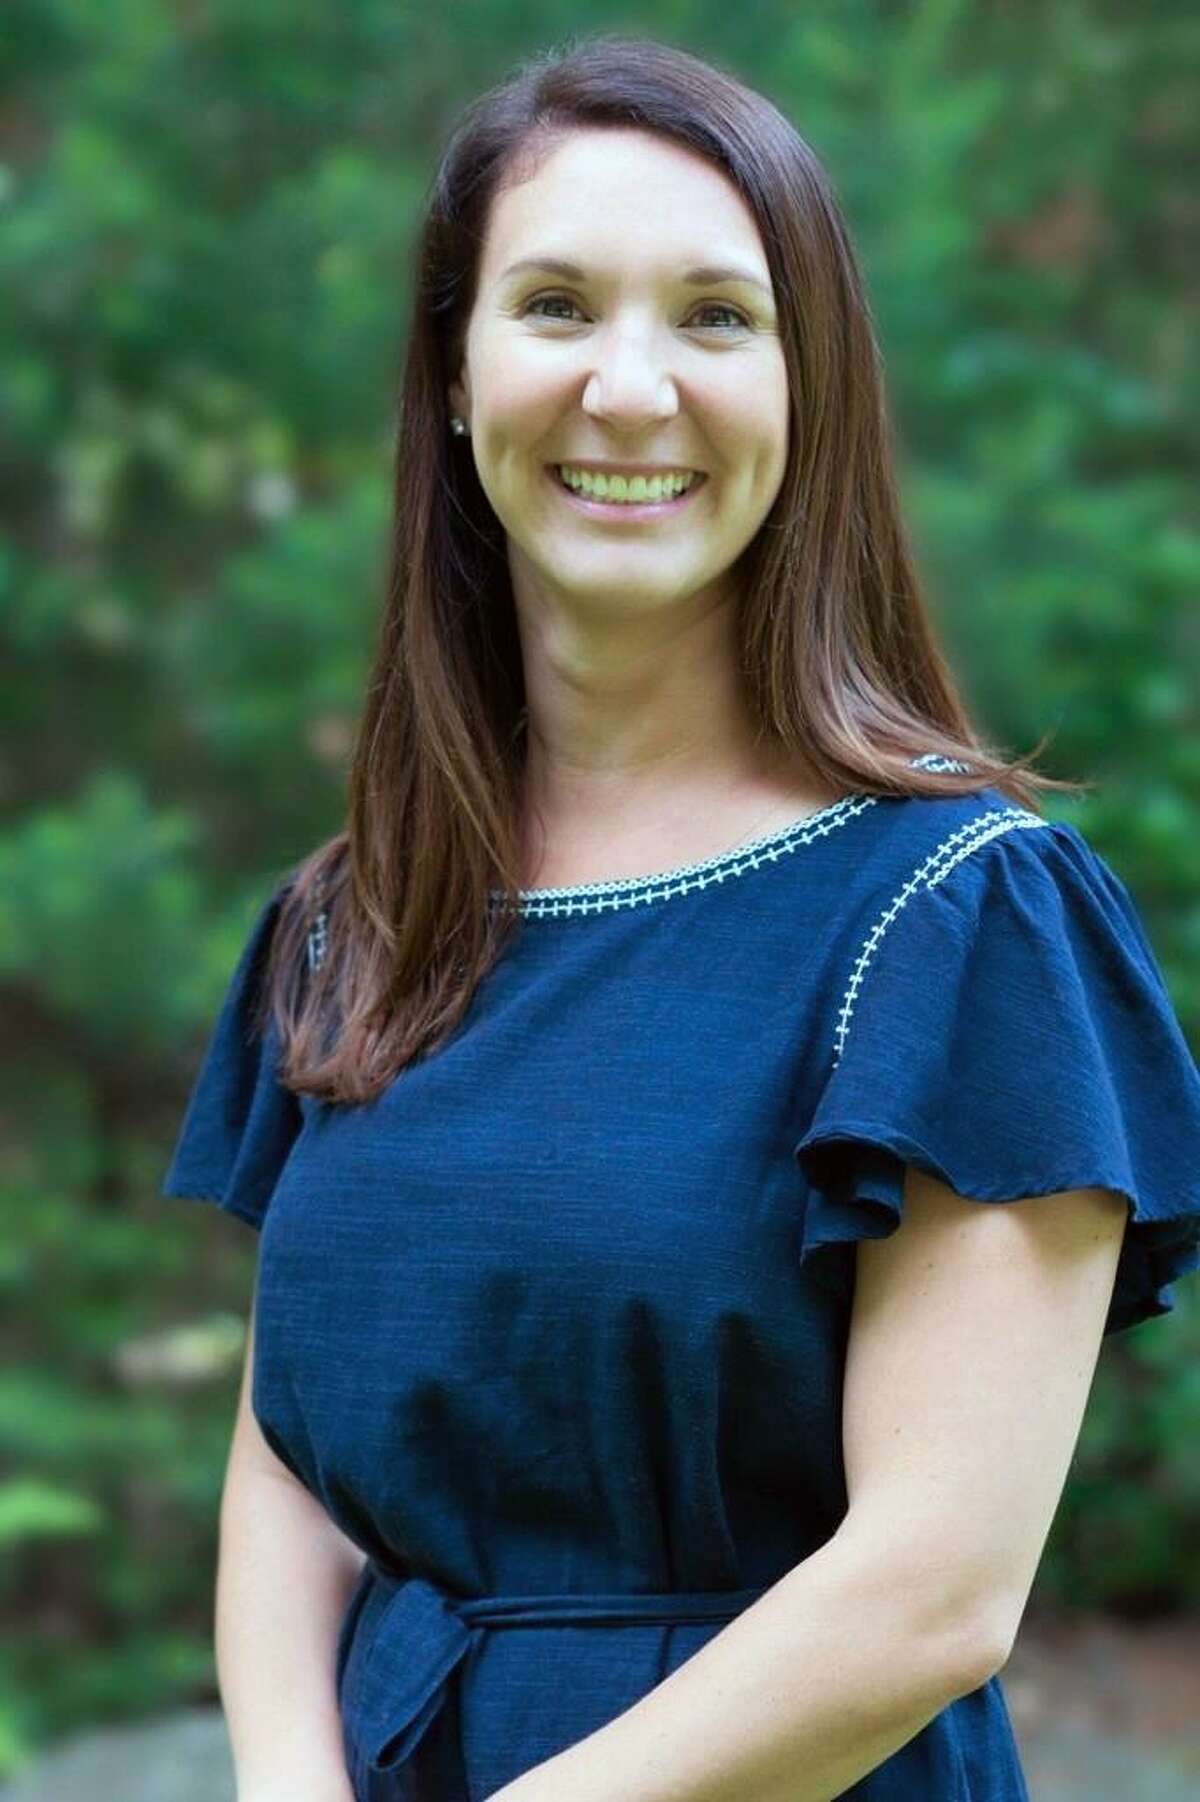 Fairfield Board of Education member Jennifer Leeper is seeking the Democratic nomination for state representative in 132nd district.